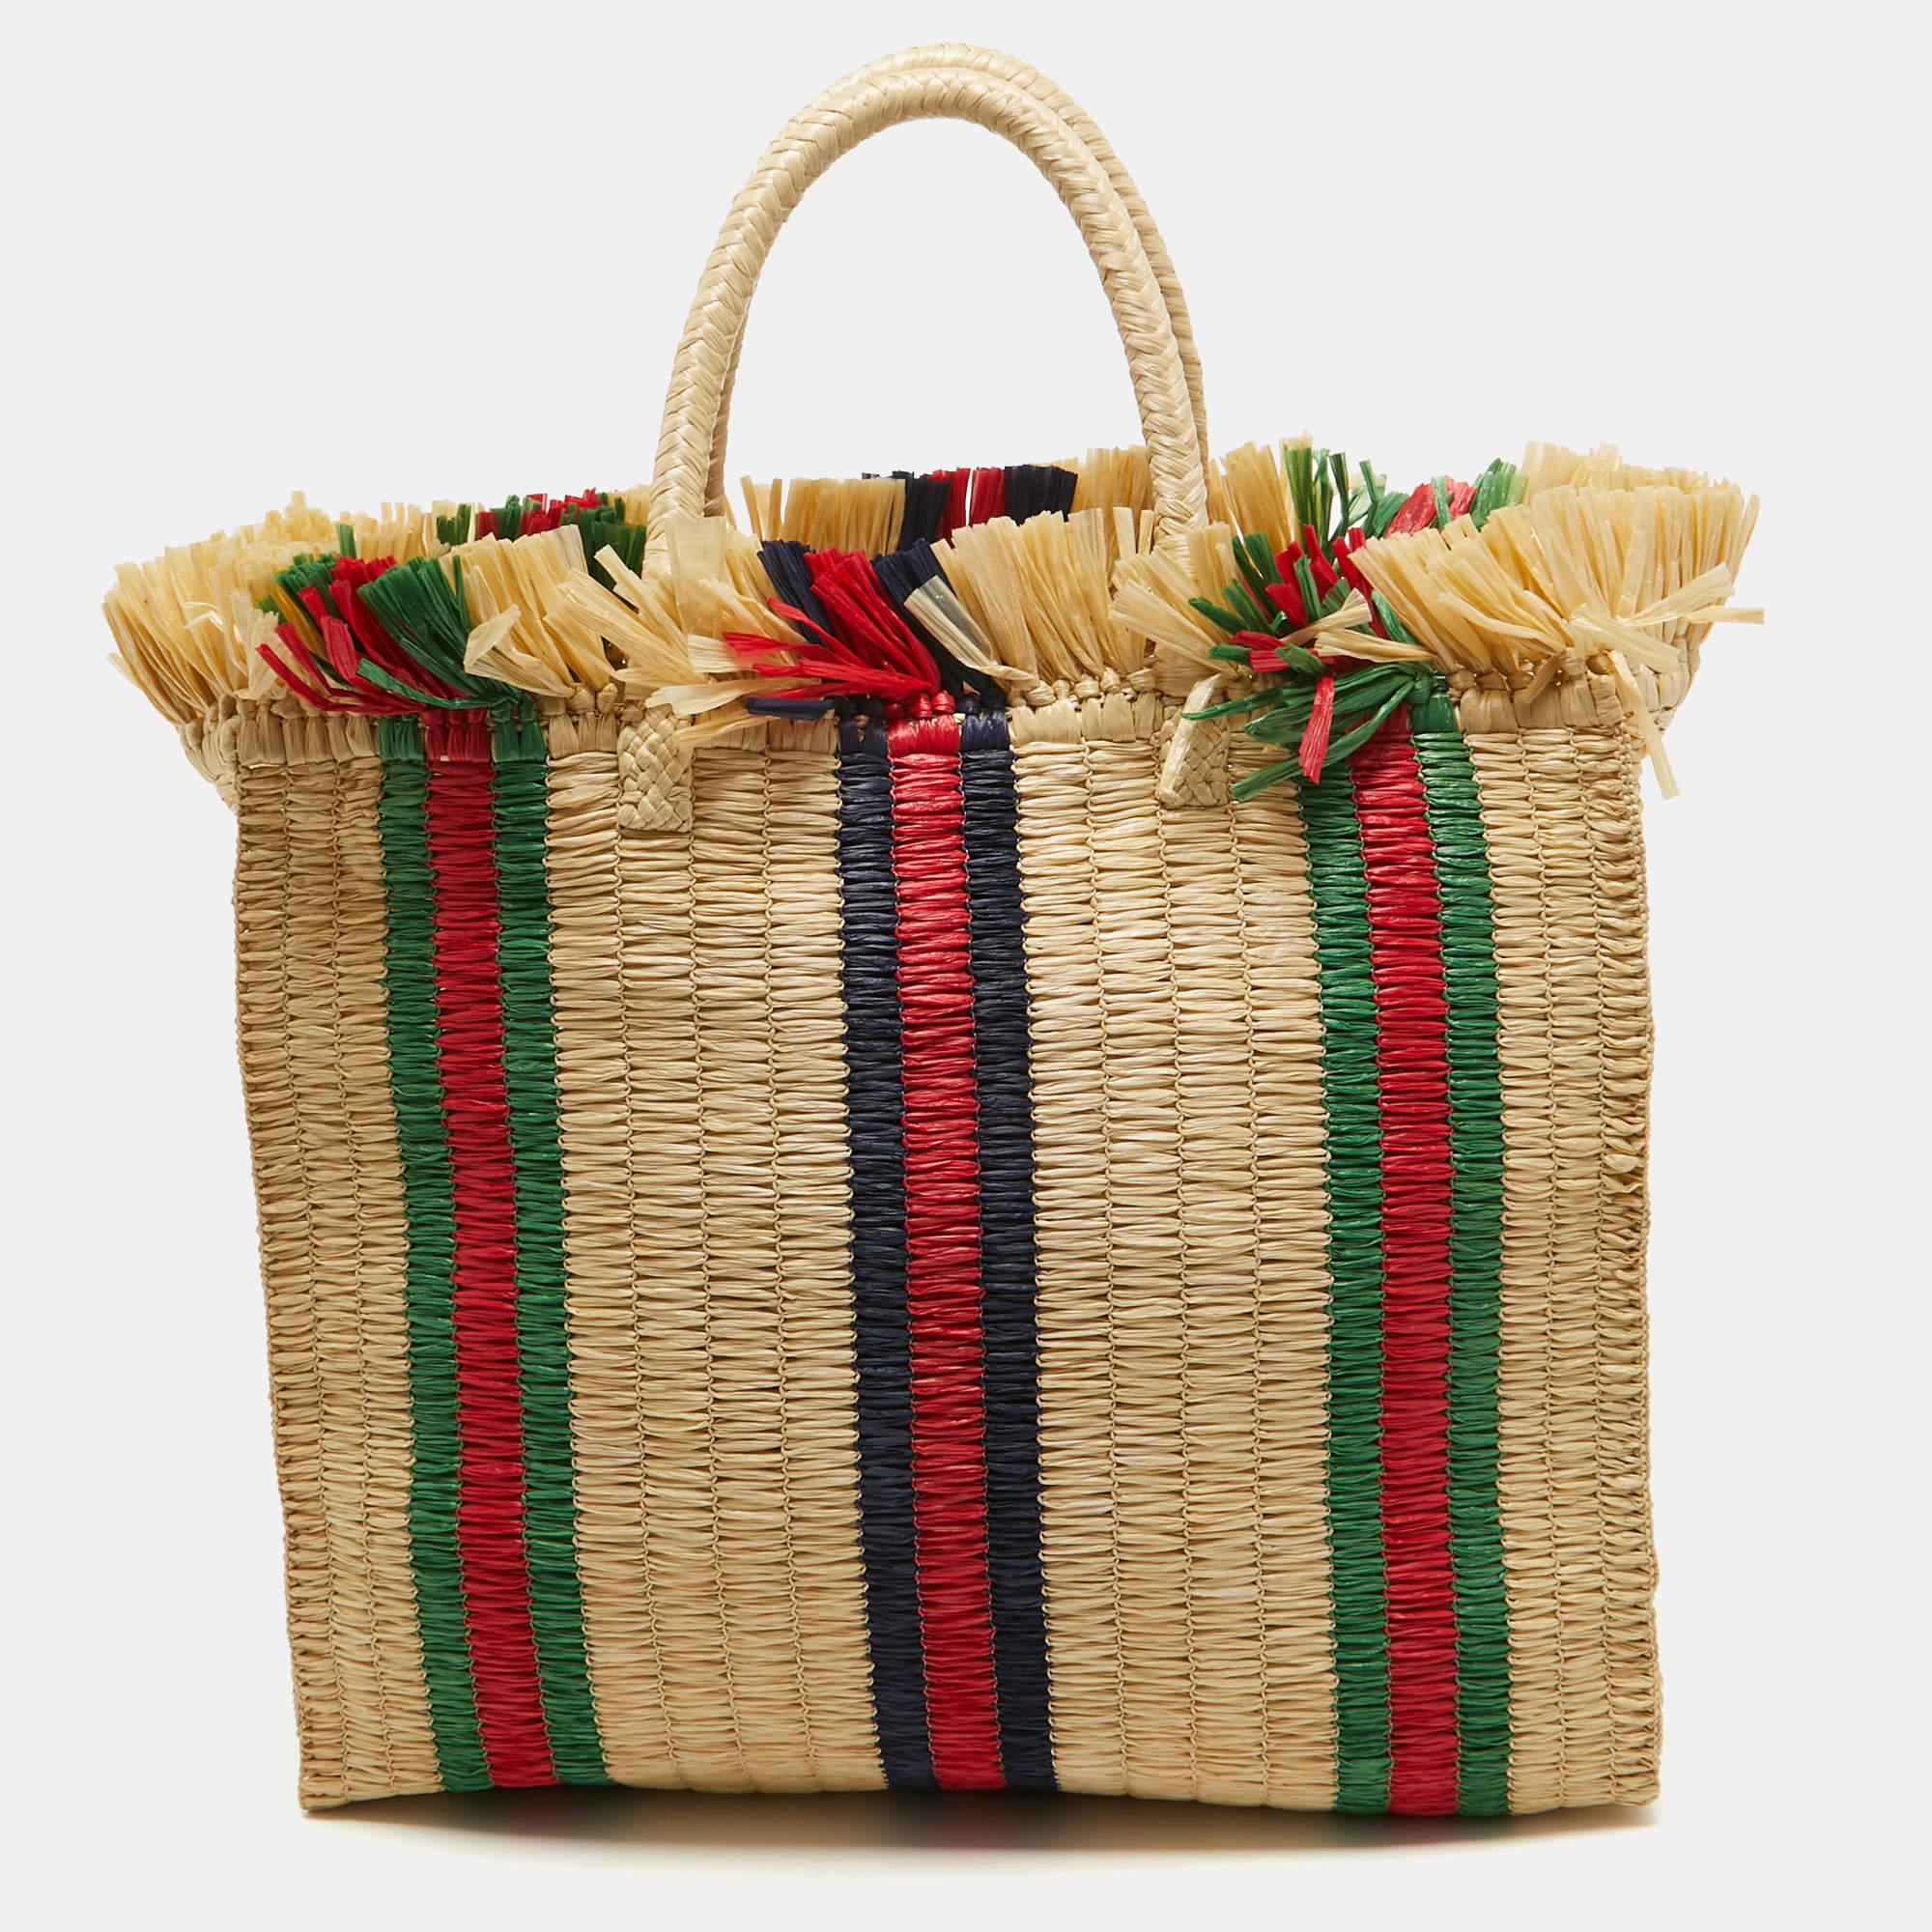 Created from high-quality materials, this Gucci straw tote is enriched with functional and classic elements. It can be carried around conveniently, and its interior is perfectly sized to keep your belongings with ease.

Includes: Fabric Pouch